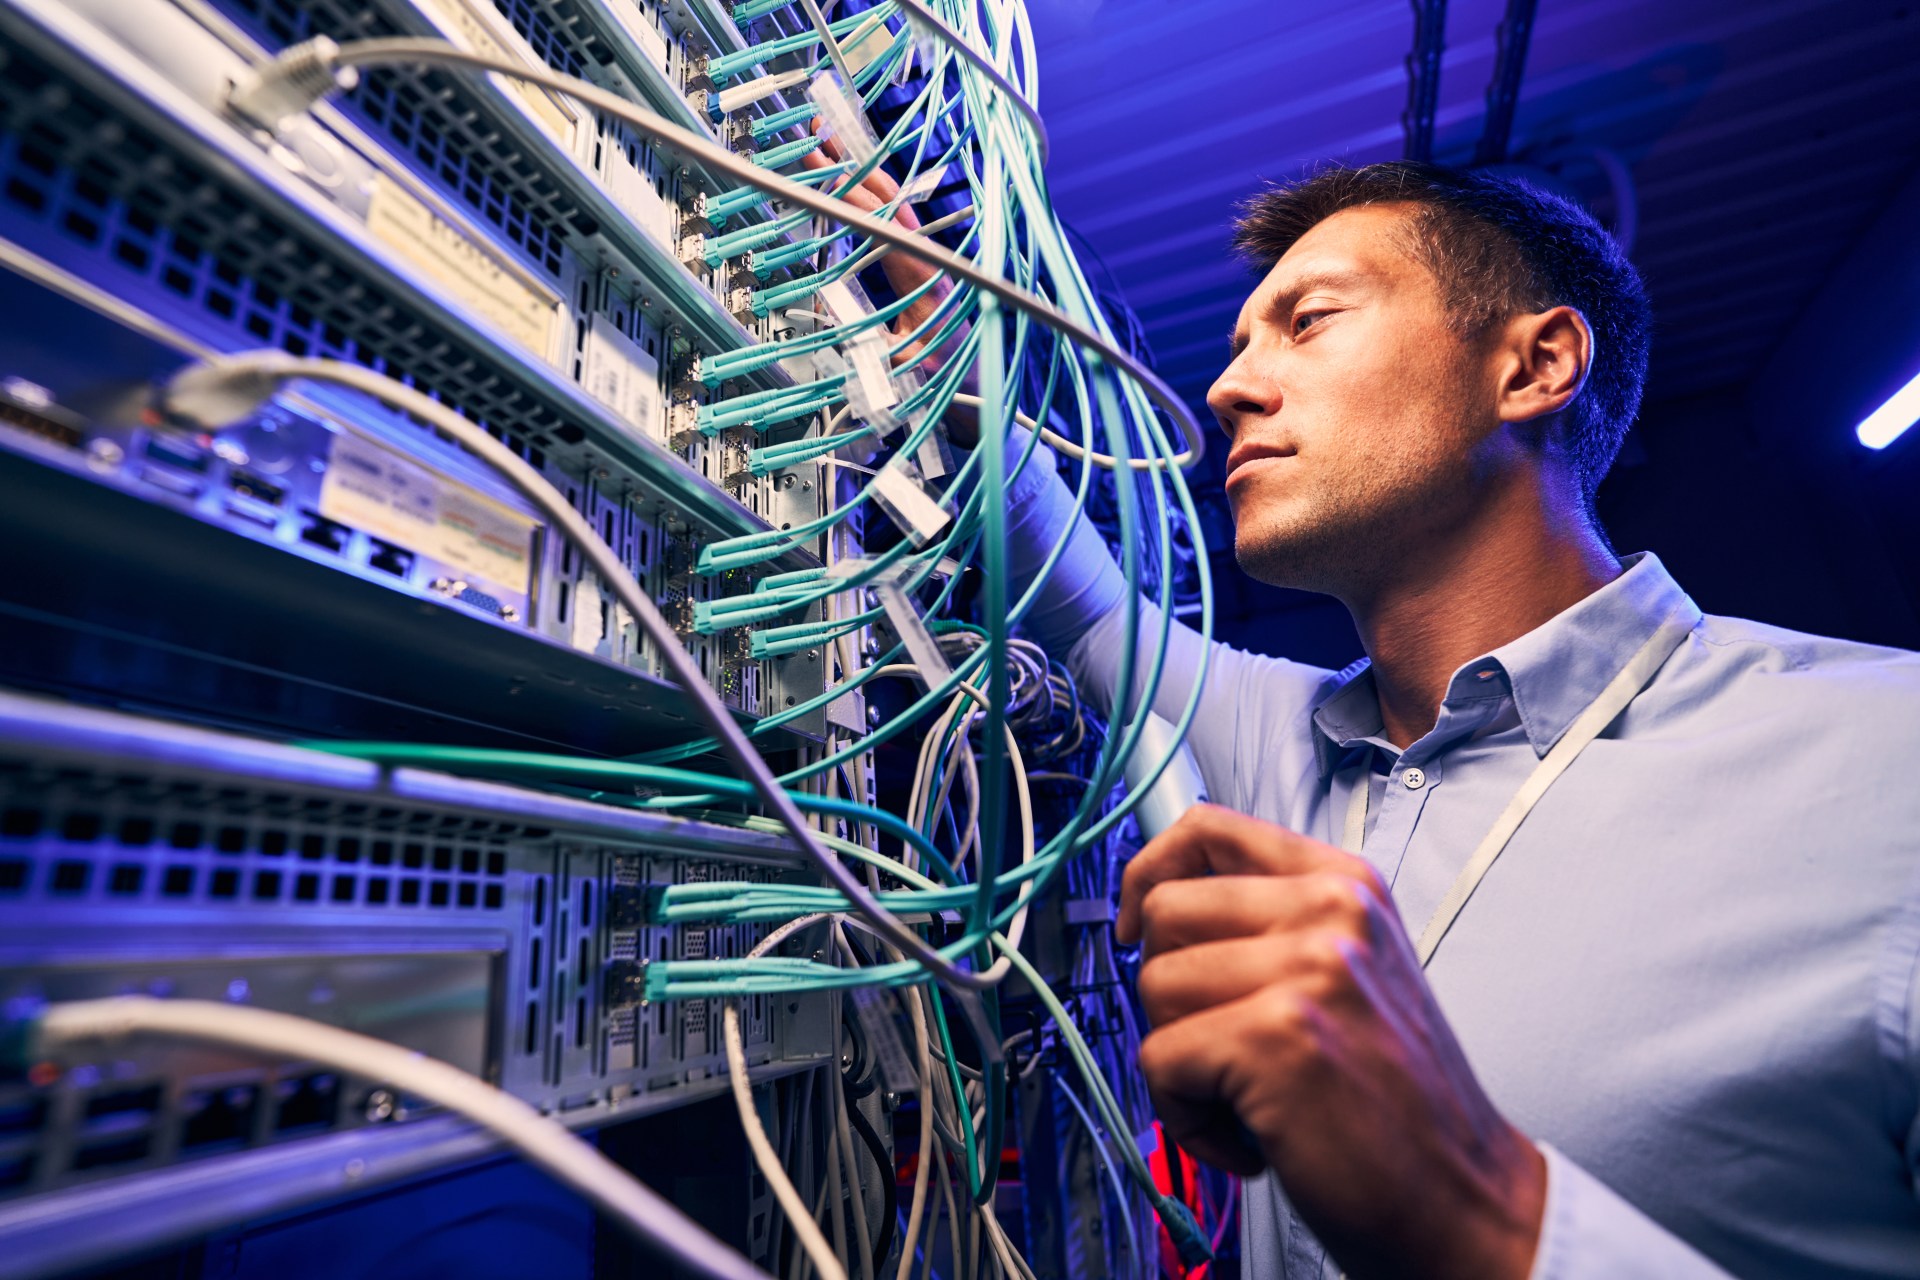 What Do You Need To Consider When Setting Up Interconnection Systems?